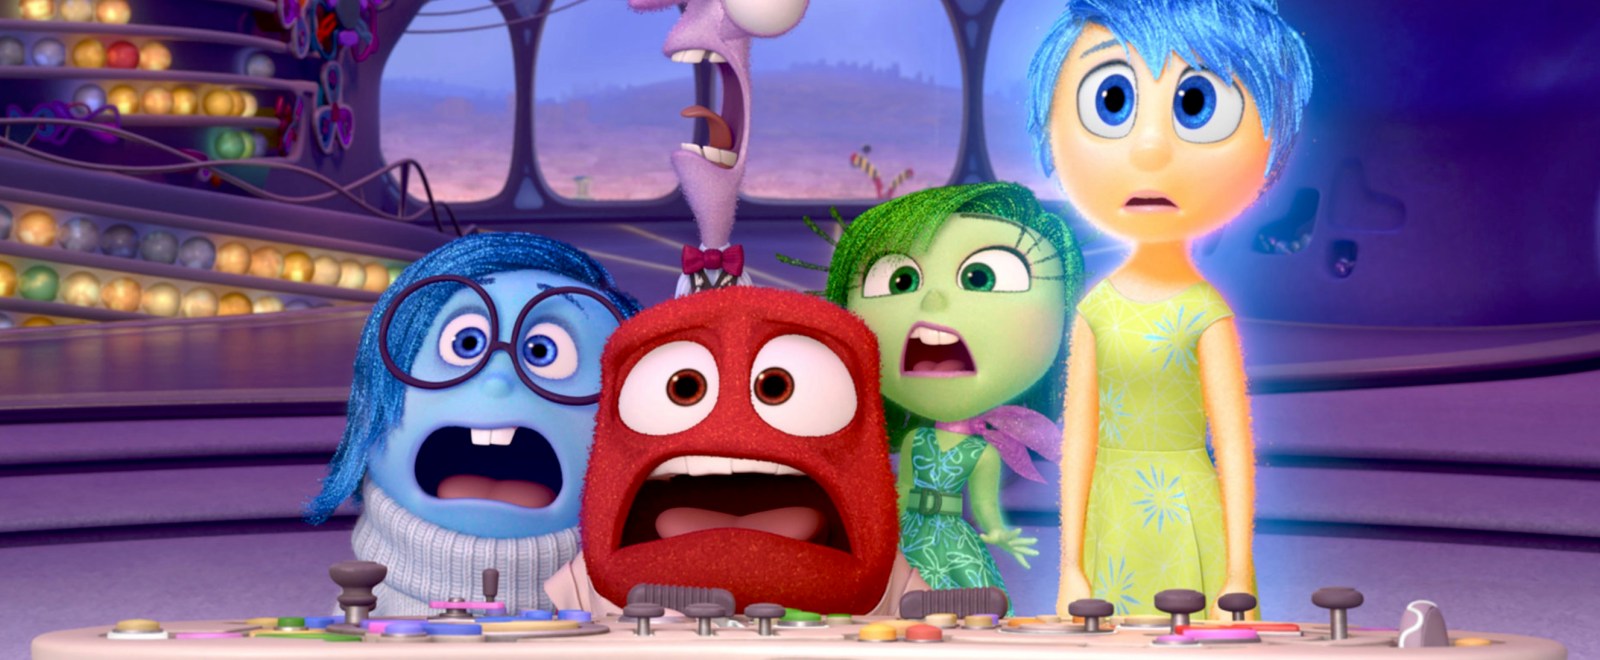 Inside Out 2': Release Date, Trailer, & More Info